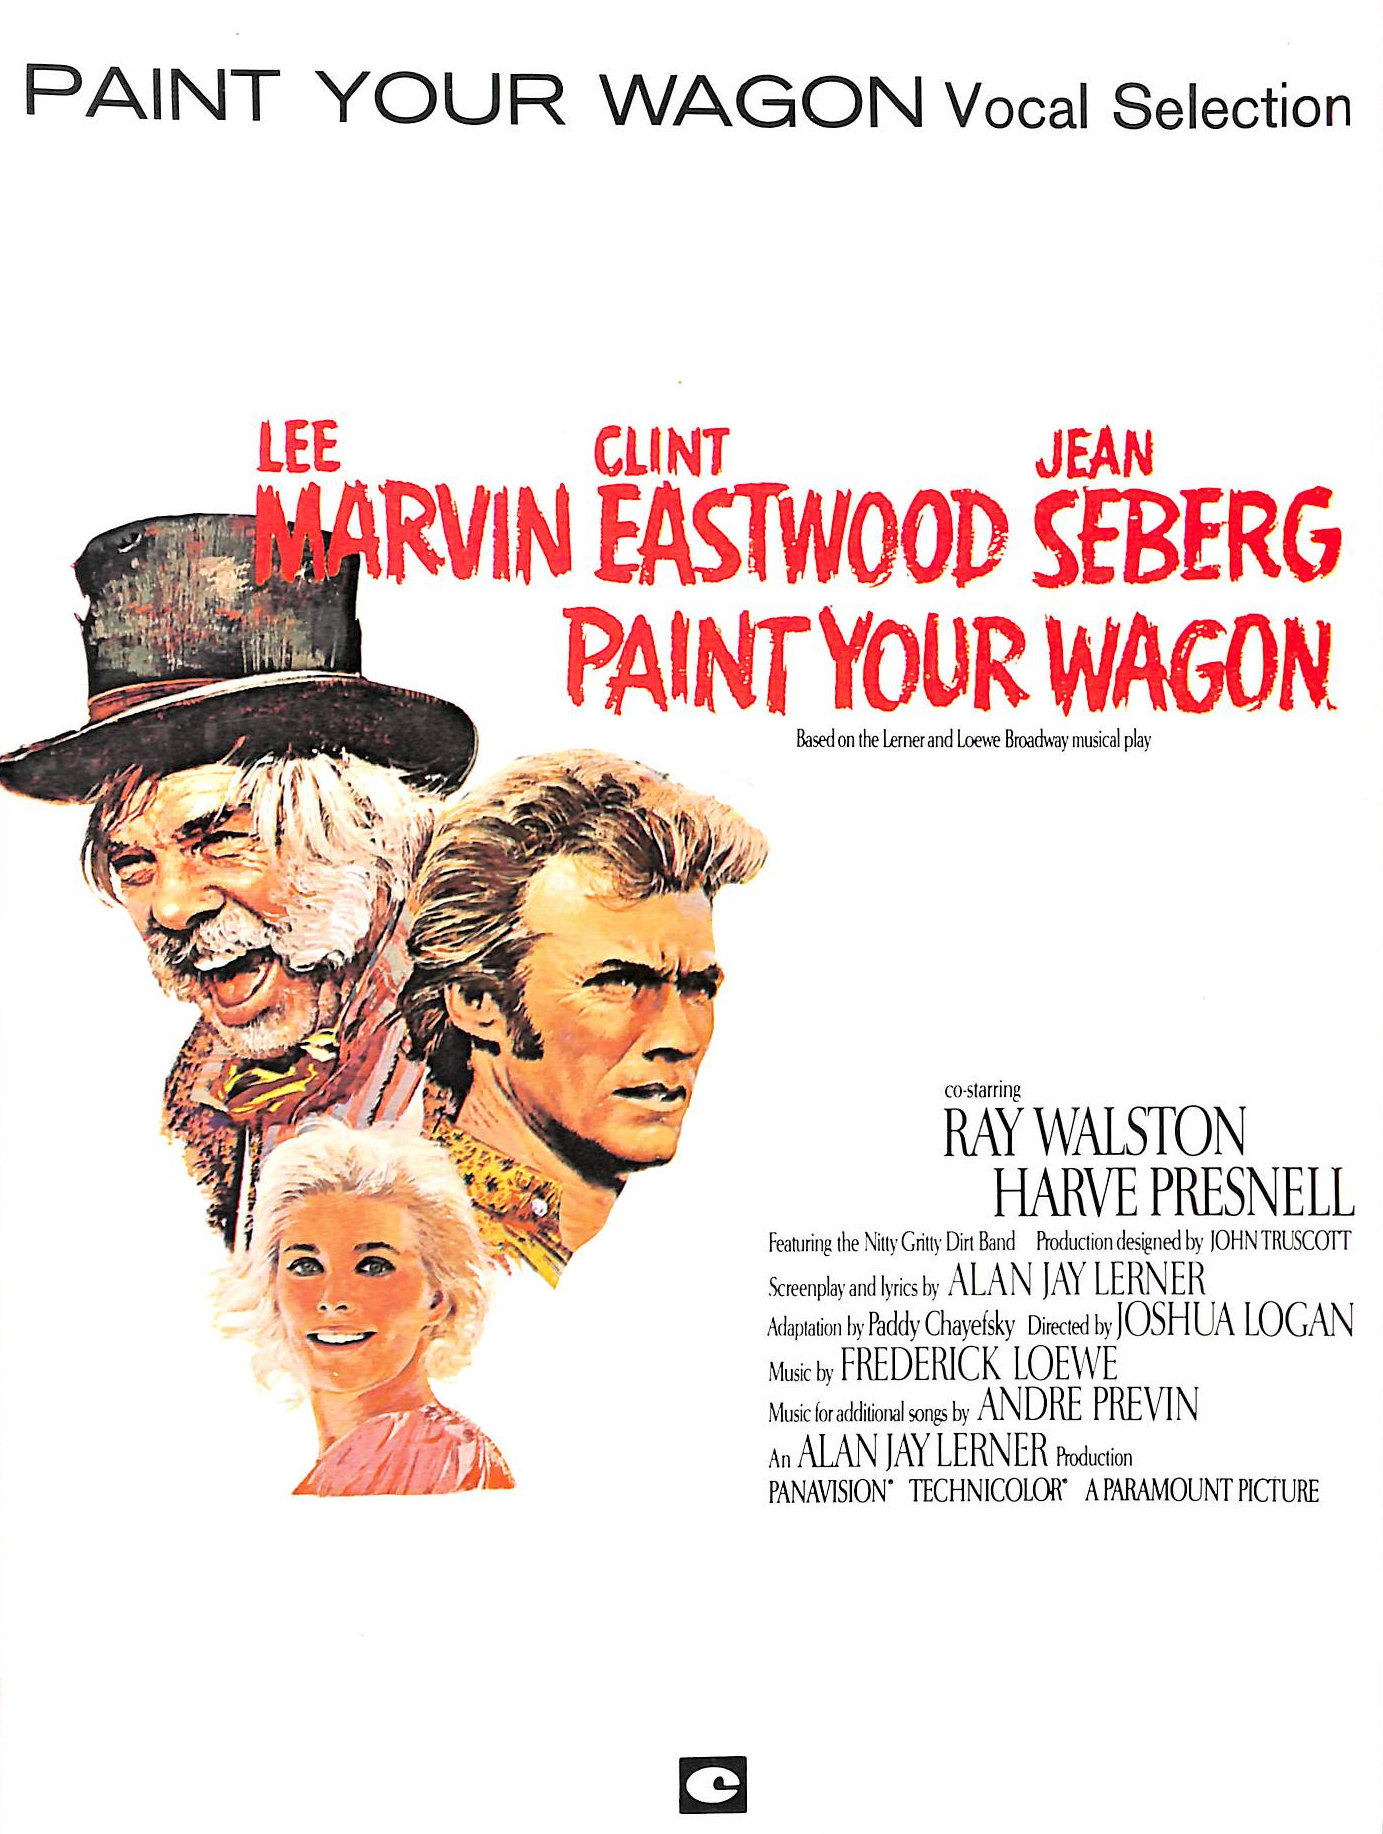 LERNER, ALAN JAY [COMPOSER]; LOEWE, FREDERICK [COMPOSER]; - Paint Your Wagon (Piano, Voice and Guitar)